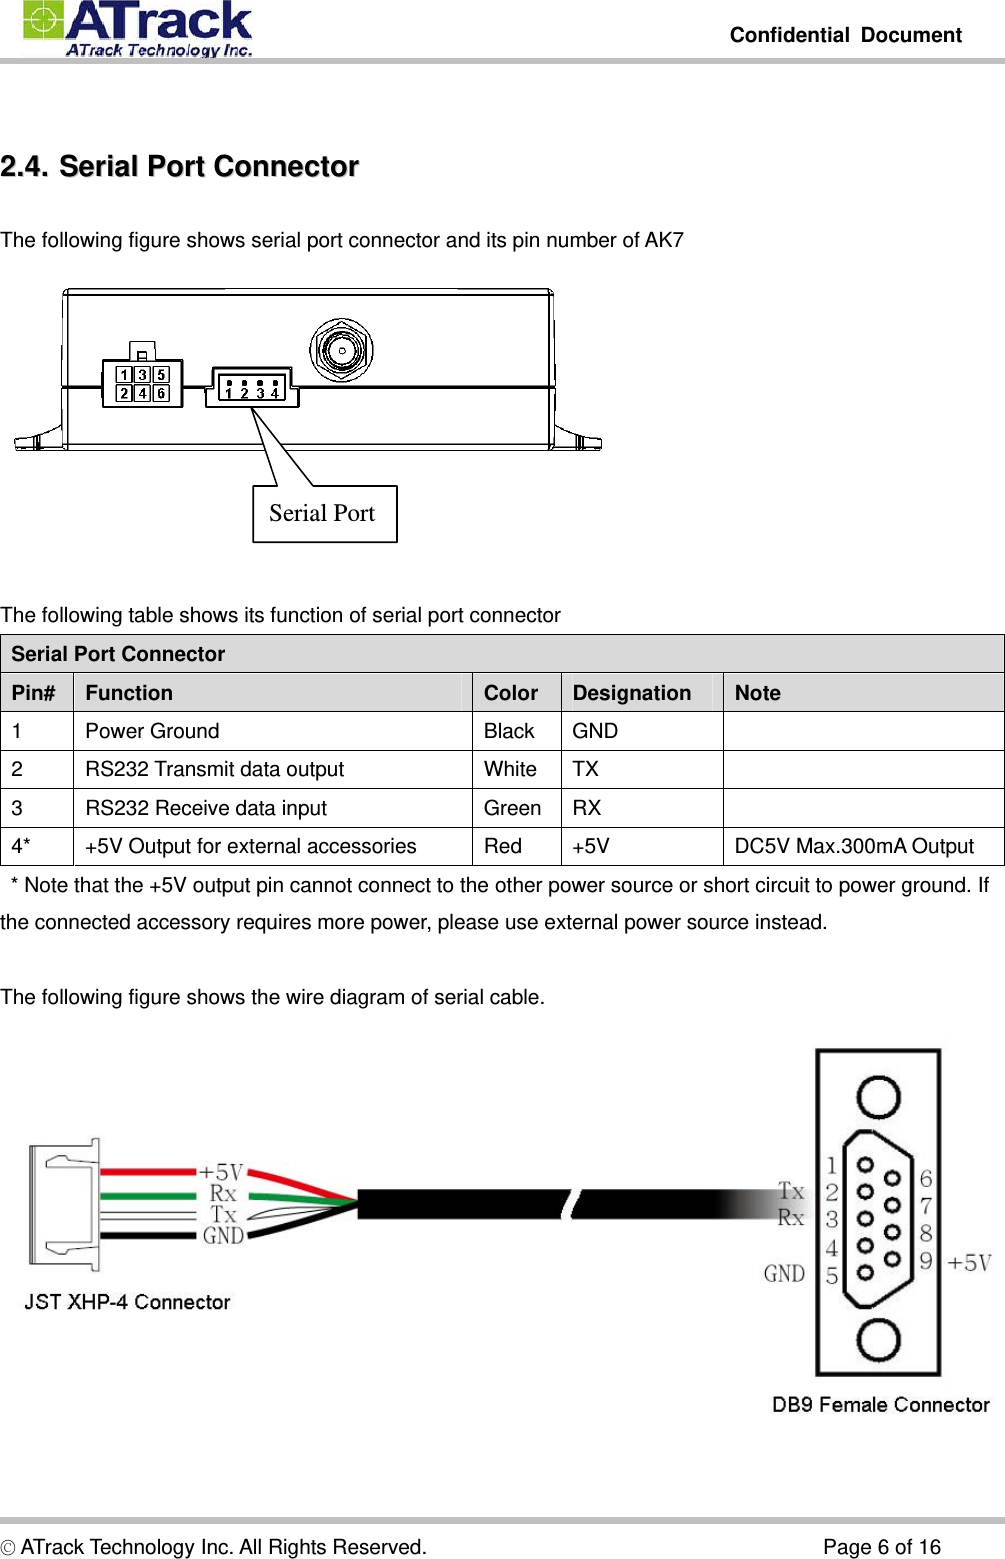         Confidential Document  © ATrack Technology Inc. All Rights Reserved.                                      Page 6 of 16  22..44..  SSeerriiaall  PPoorrtt  CCoonnnneeccttoorr  The following figure shows serial port connector and its pin number of AK7     The following table shows its function of serial port connector Serial Port Connector Pin#  Function  Color  Designation  Note 1 Power Ground  Black GND   2  RS232 Transmit data output  White  TX   3  RS232 Receive data input  Green  RX   4*  +5V Output for external accessories  Red  +5V  DC5V Max.300mA Output   * Note that the +5V output pin cannot connect to the other power source or short circuit to power ground. If the connected accessory requires more power, please use external power source instead.  The following figure shows the wire diagram of serial cable.  Serial Port 